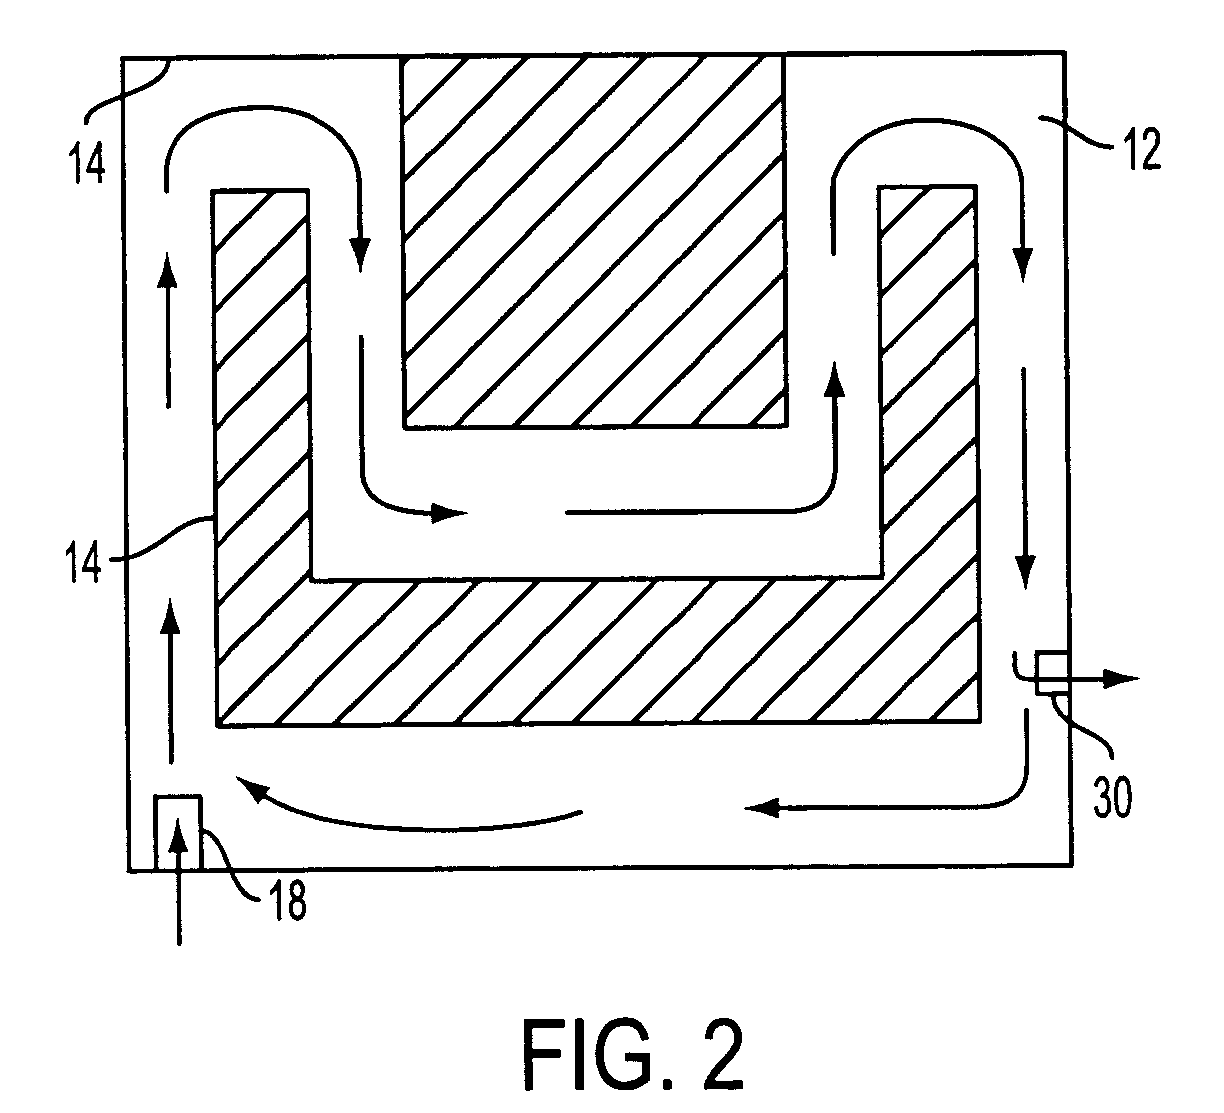 Method and system for removal of contaminants from aqueous solution